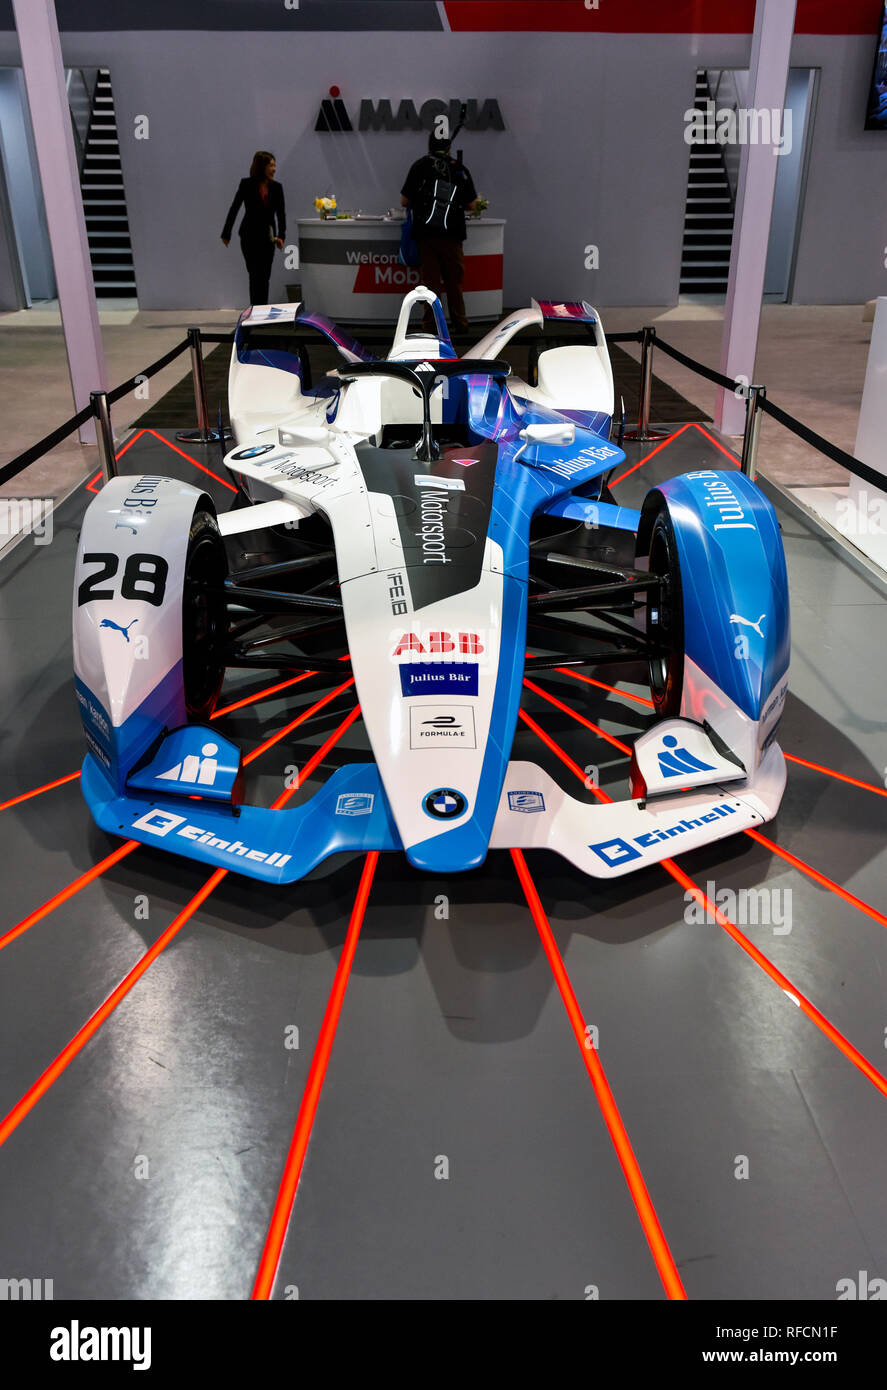 Concept Racing Car at the 2019 CES Consumer Electronics Show in Las Vegas, Nevada Stock Photo